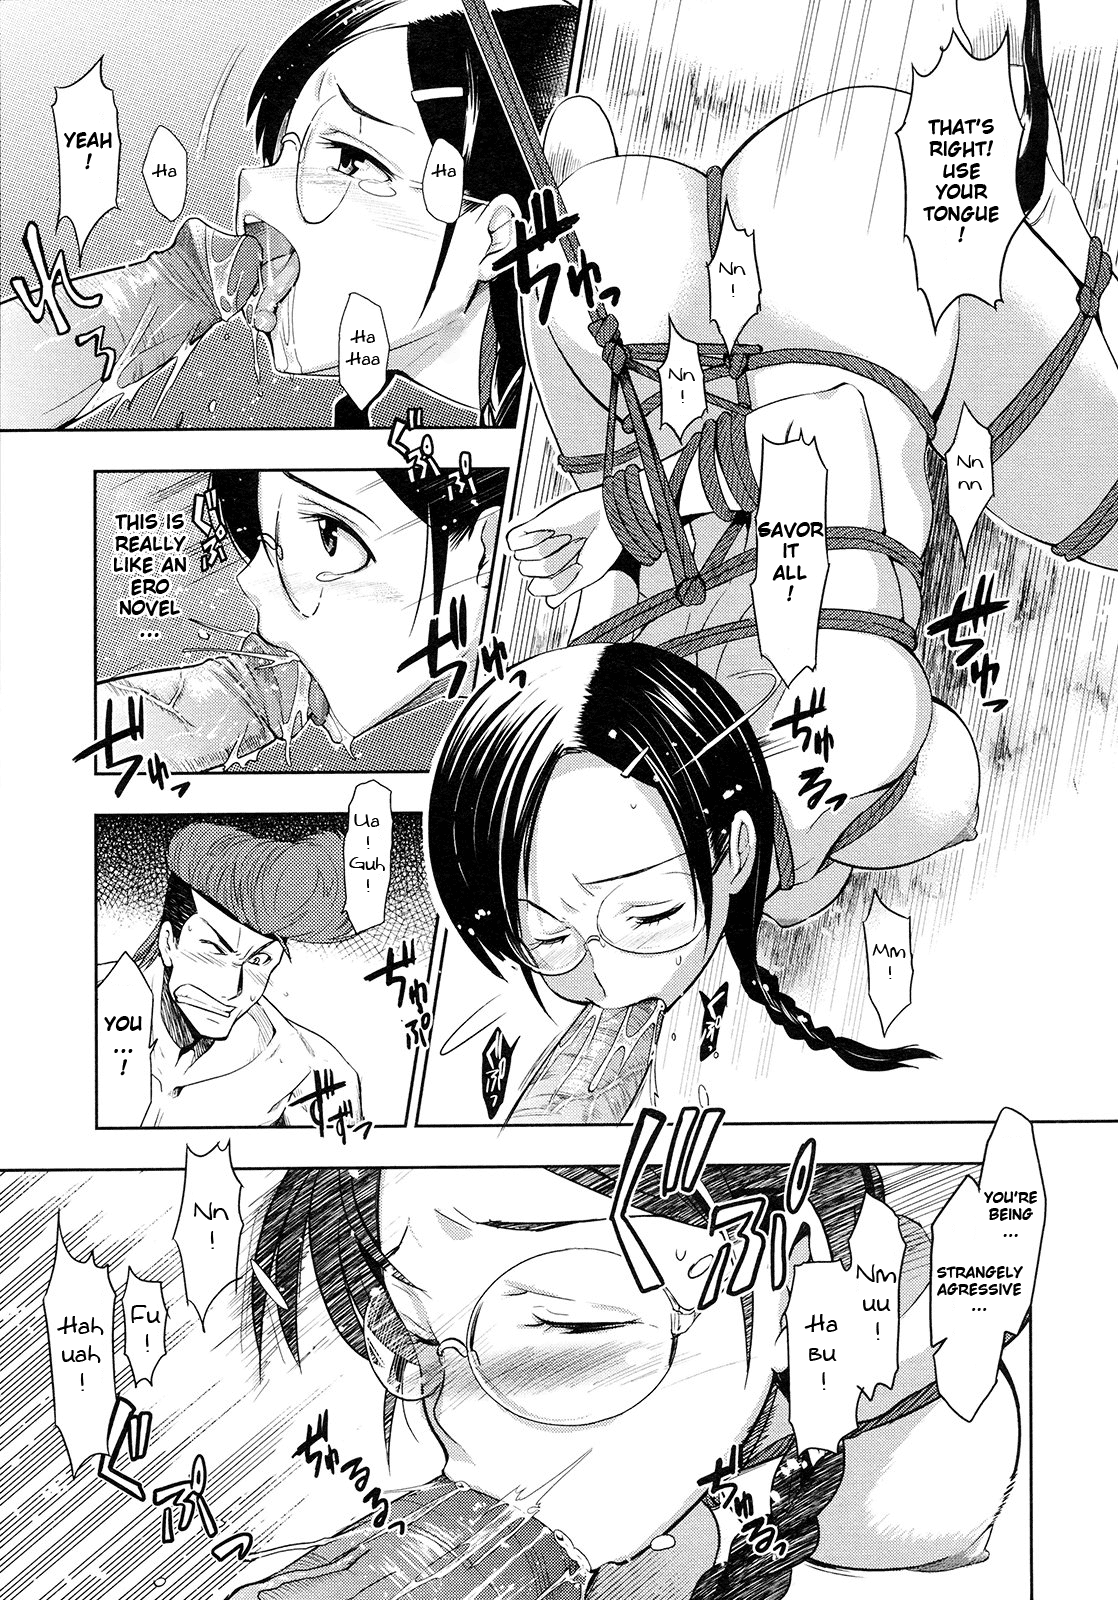 [Shinsuke Inue] The Strongest Man VS The King of Fighting [Eng] {doujin-moe.us} 